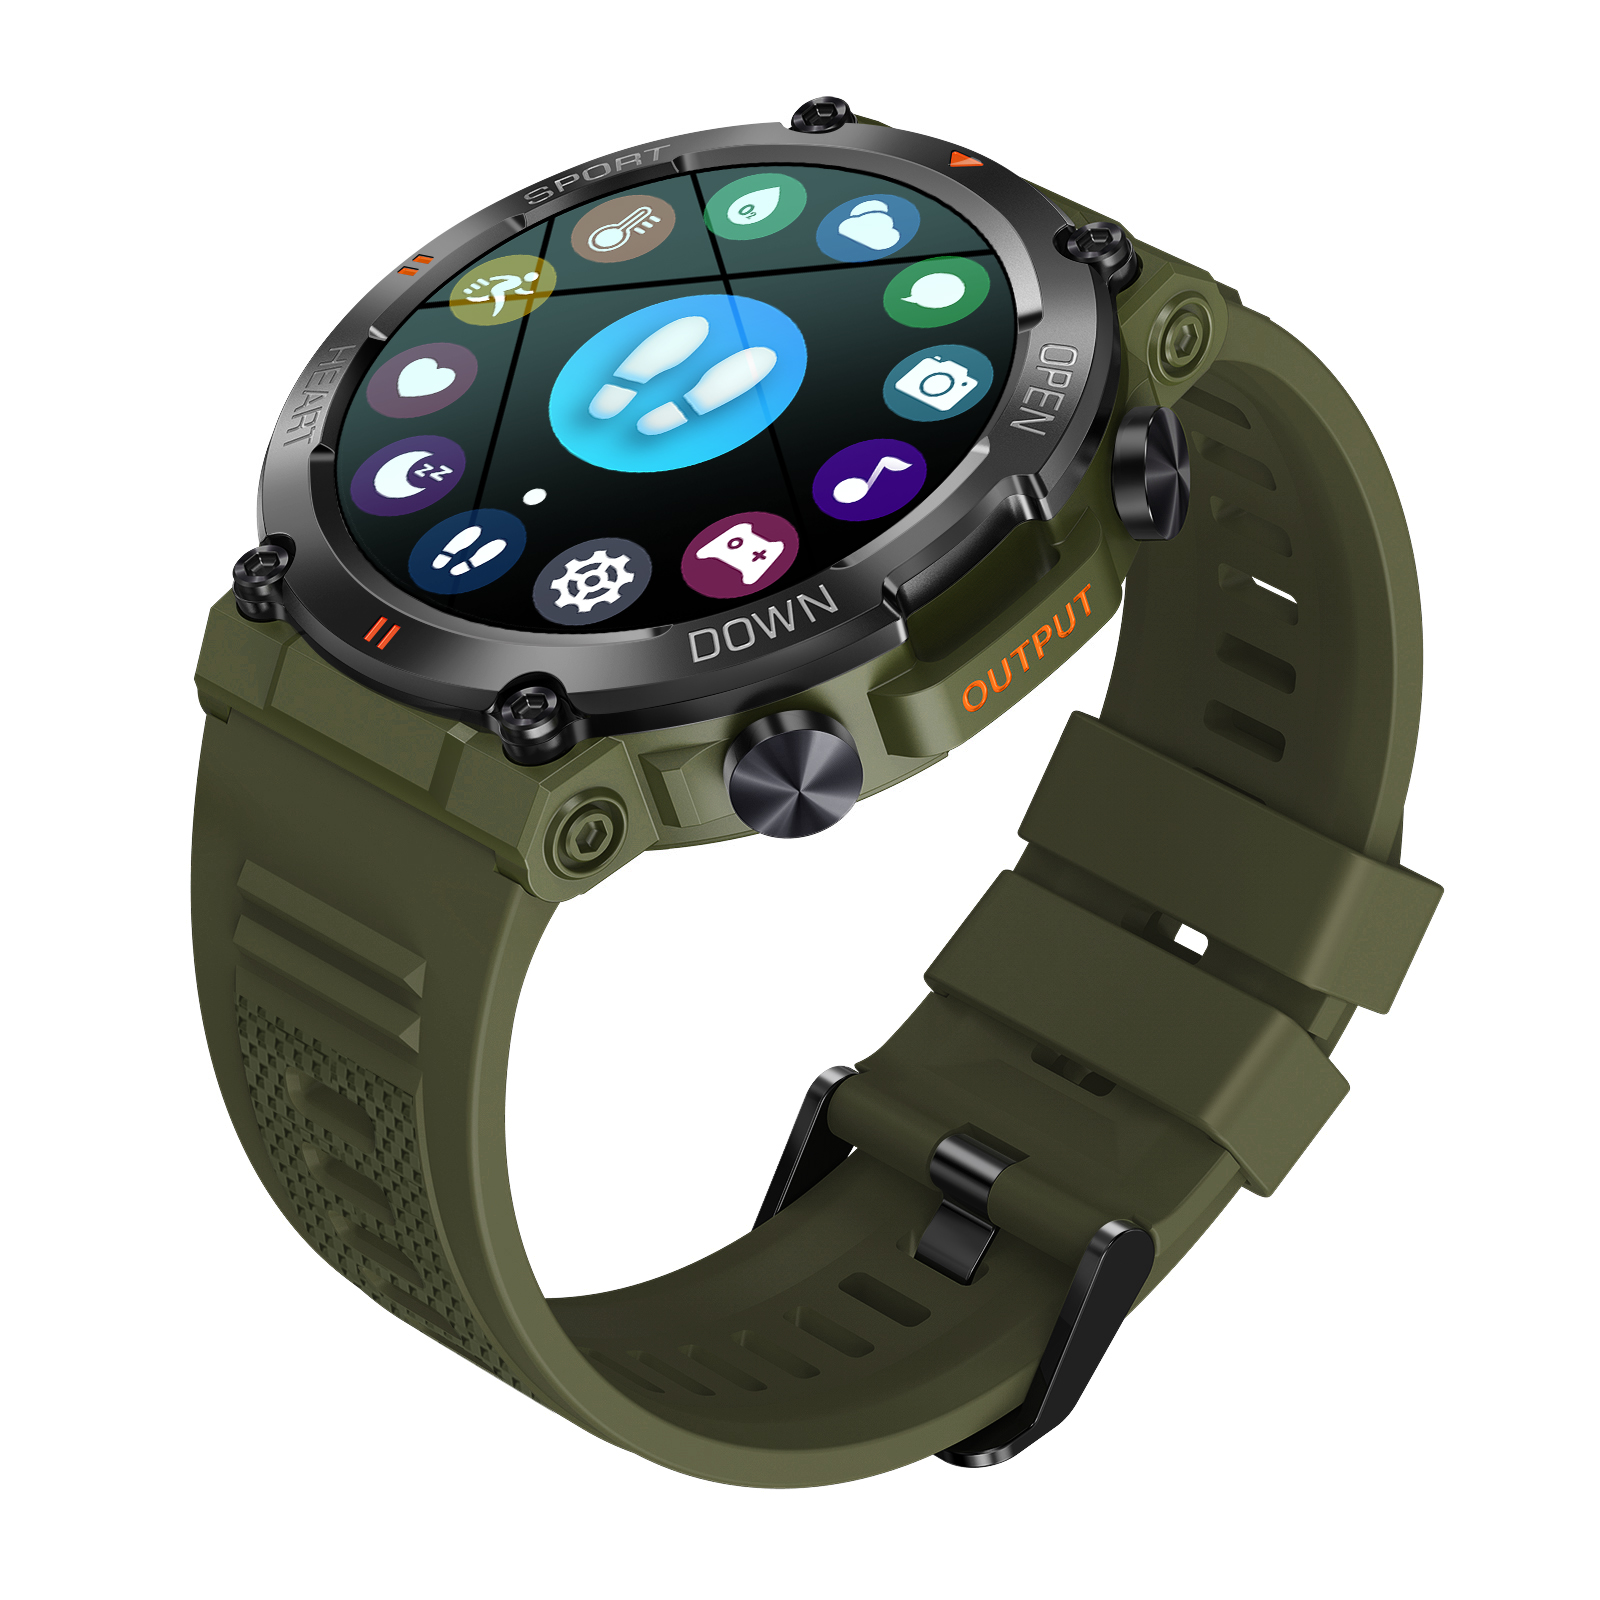 Round screen Smart Watch with BT Answer Call HR BP SPO2 